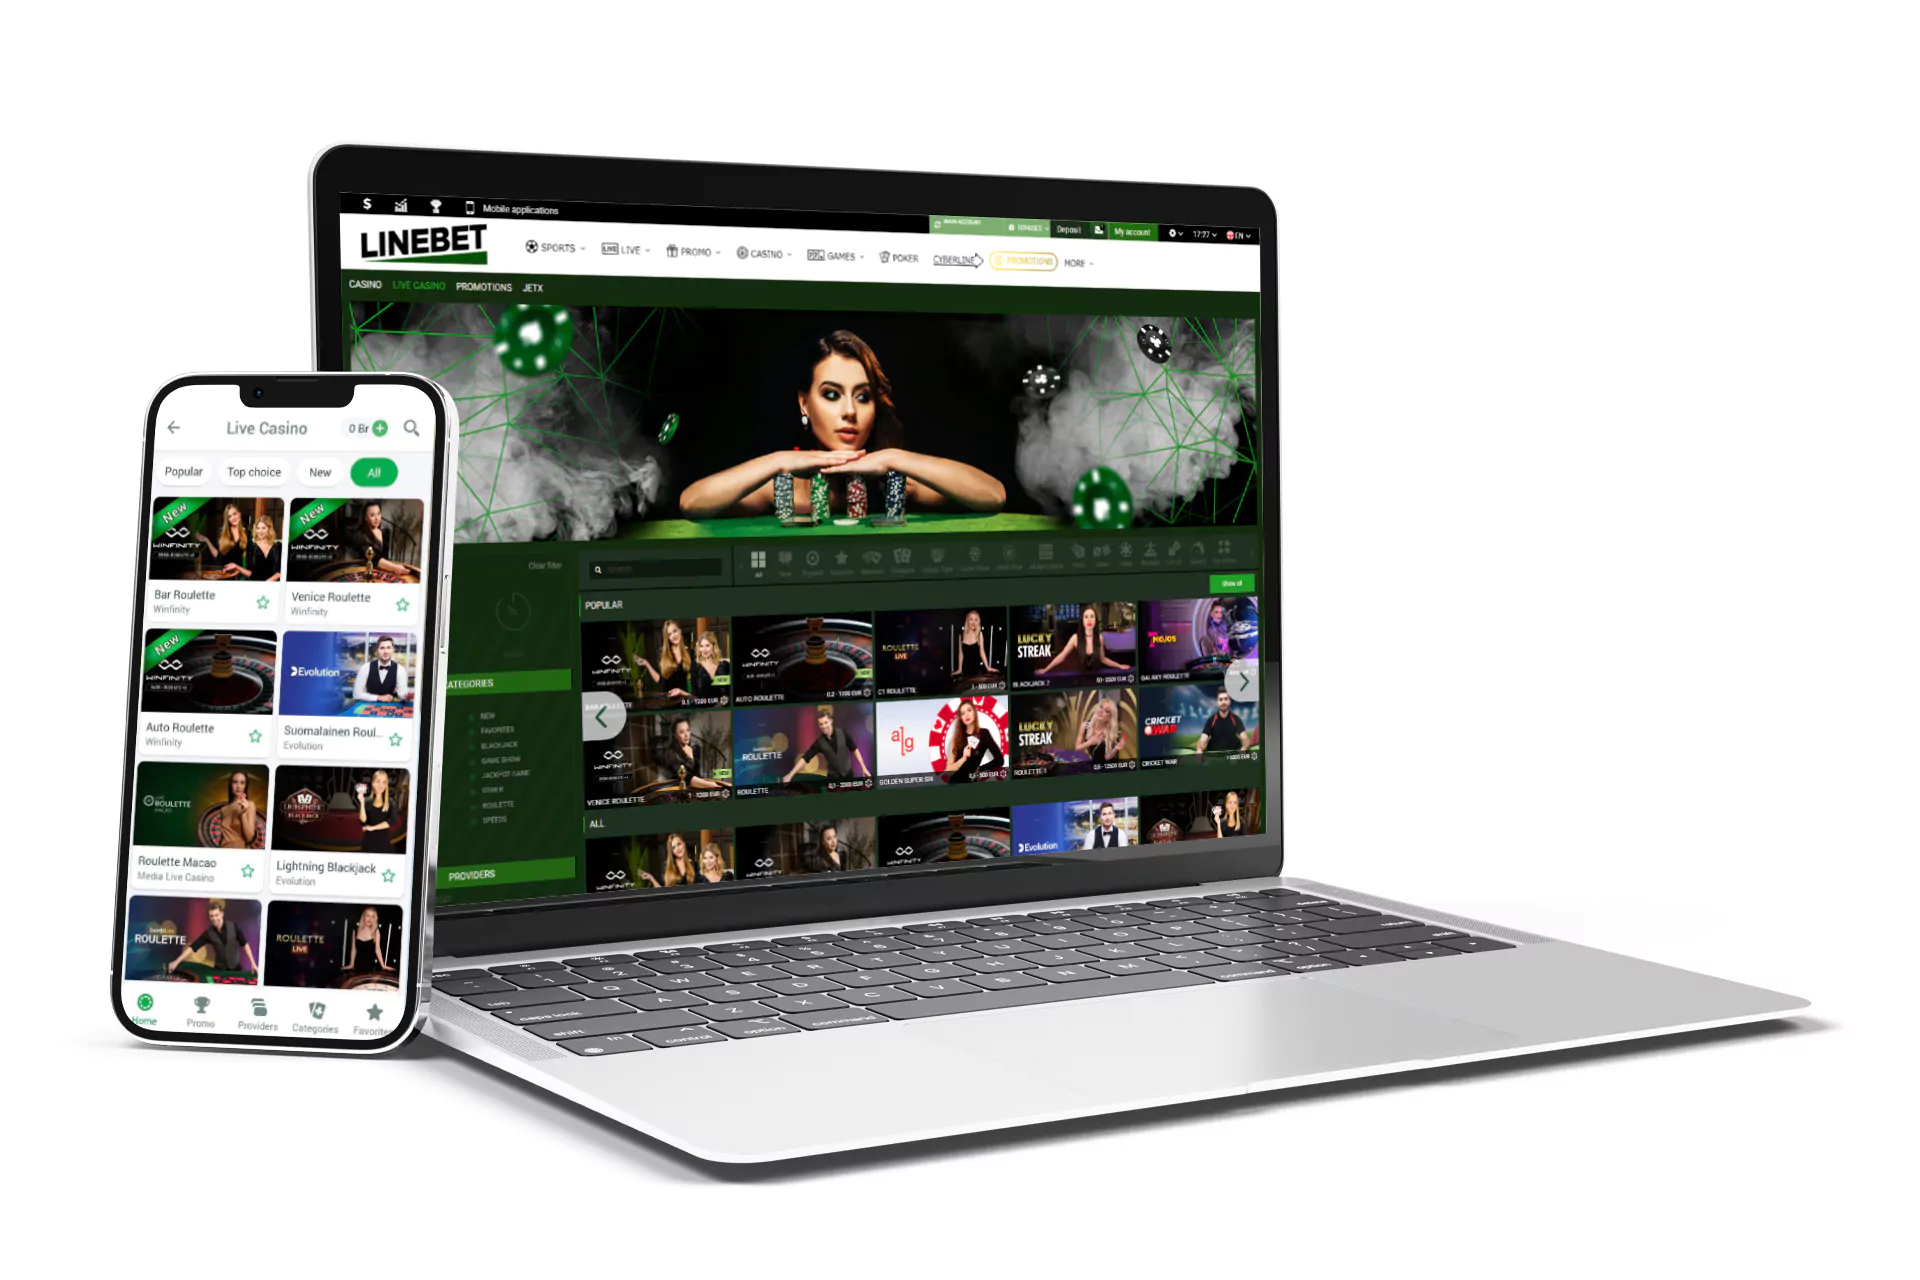 If you prefer playing with real people, visit the Linebet Live Casino.